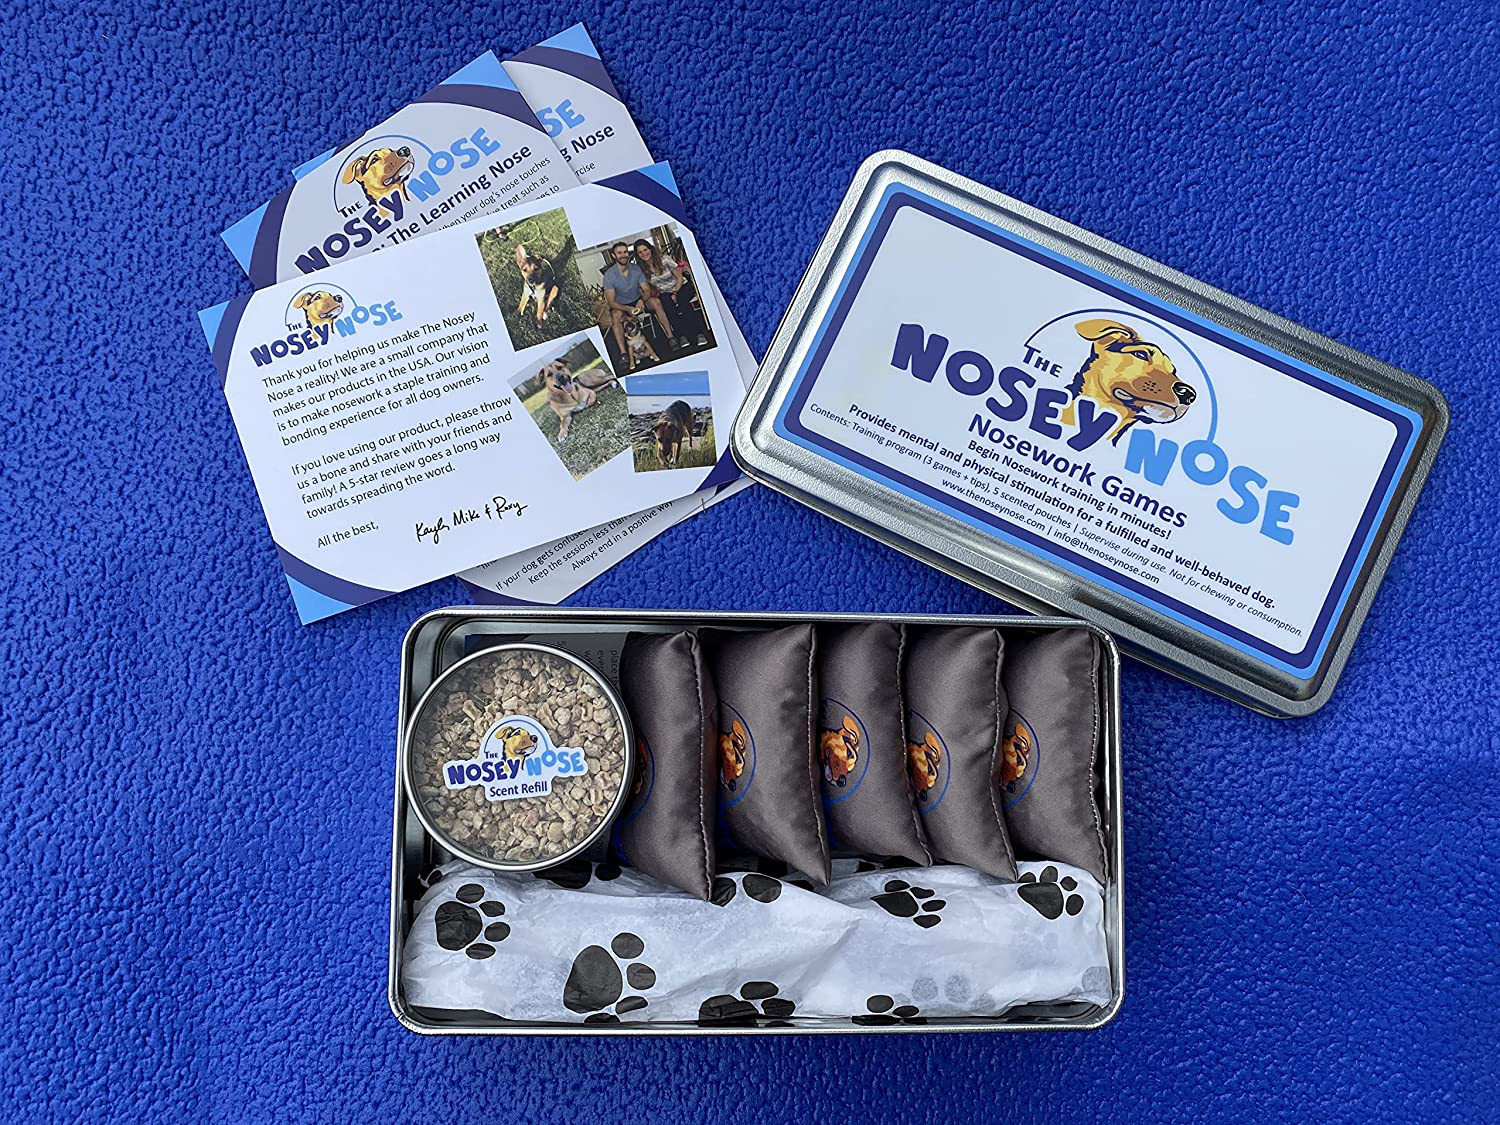 The Nosey Nose: Nosework Training Program, Games, Supplies for